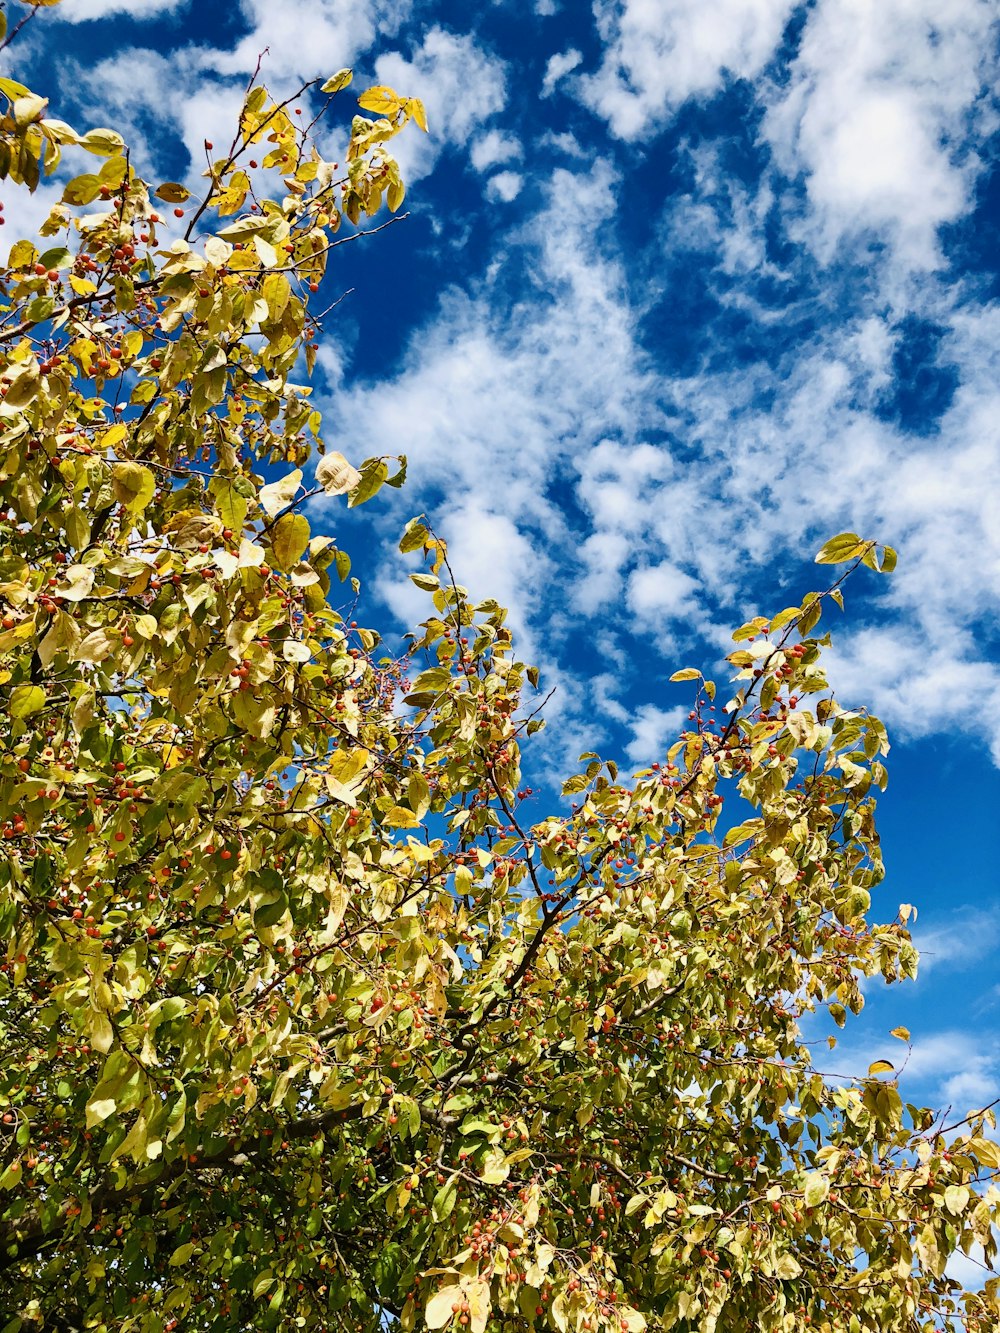 green and yellow leaves under blue sky during daytime